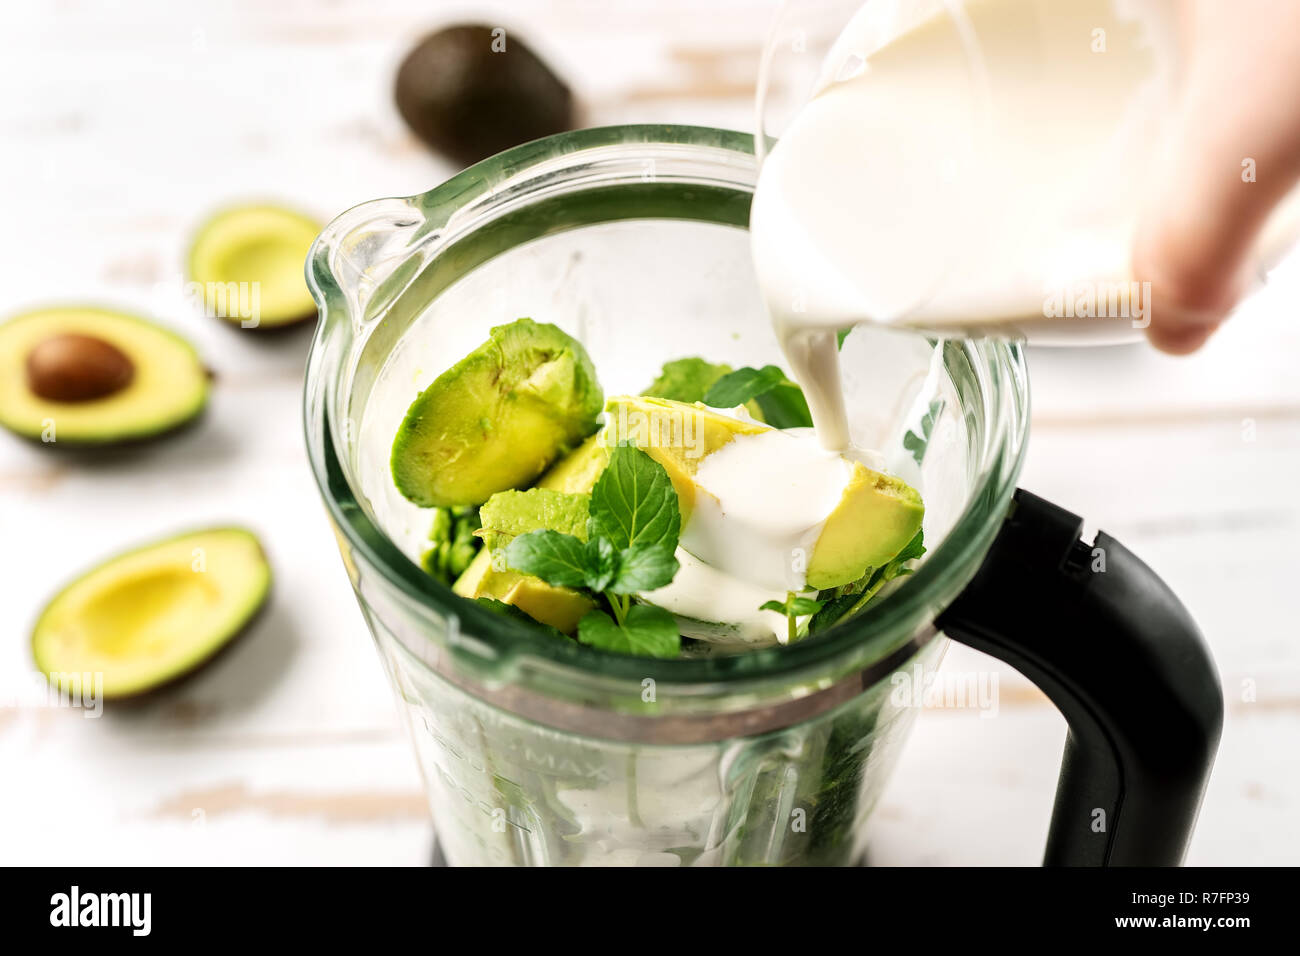 Top view of blender with avocado peaces Stock Photo